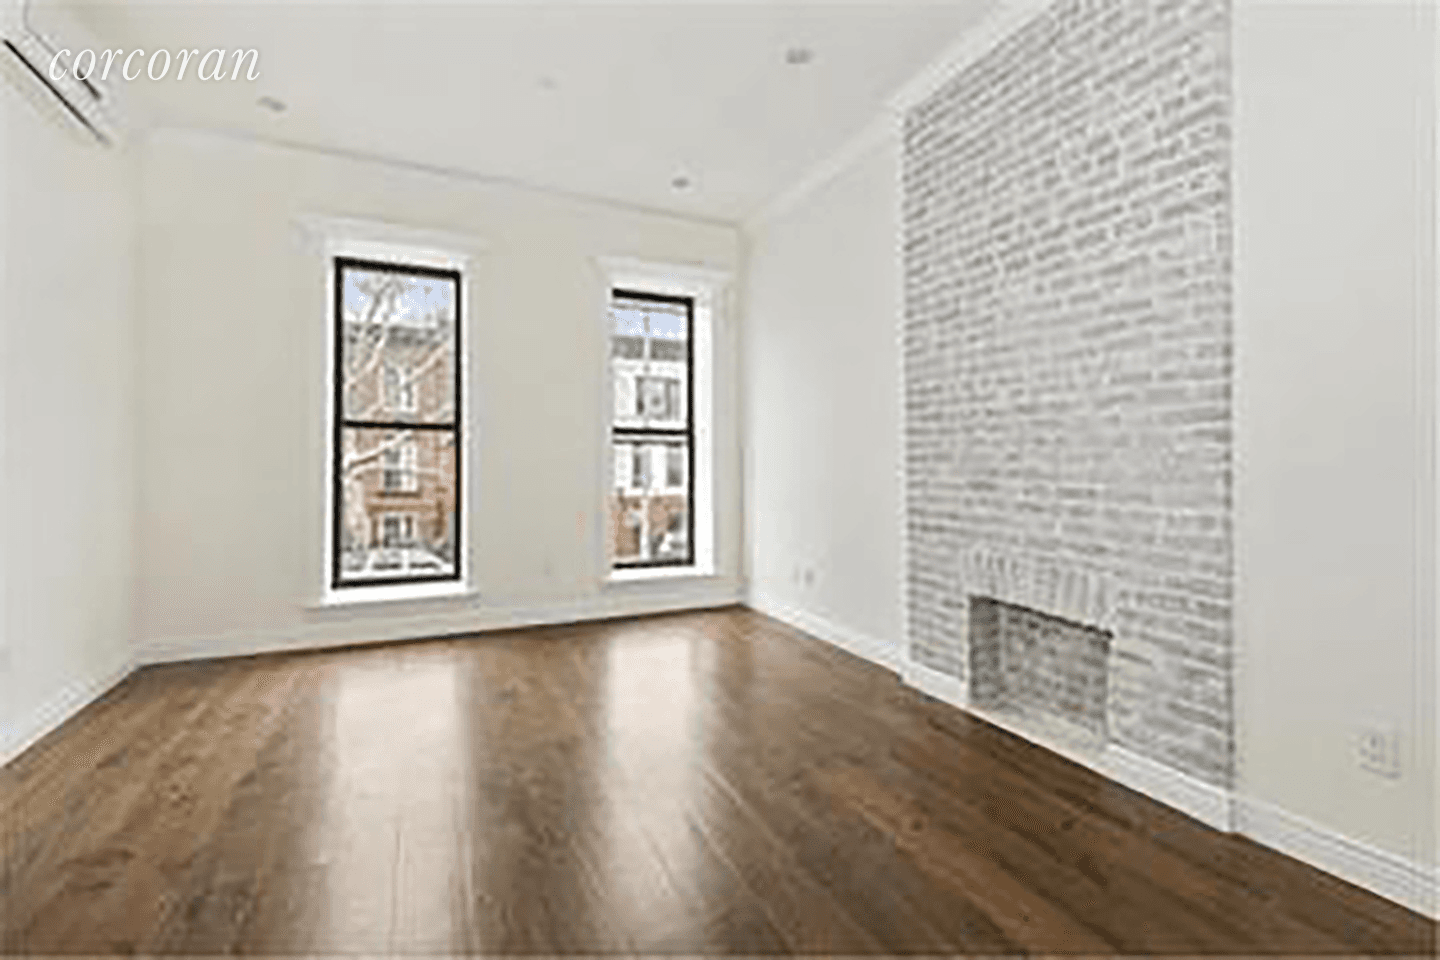 Available August 4thSpacious 3 bedroom, 2 bathroom duplex with two private terraces available for rent in a newly renovated Brooklyn brownstone plus washer dryer in the unit.